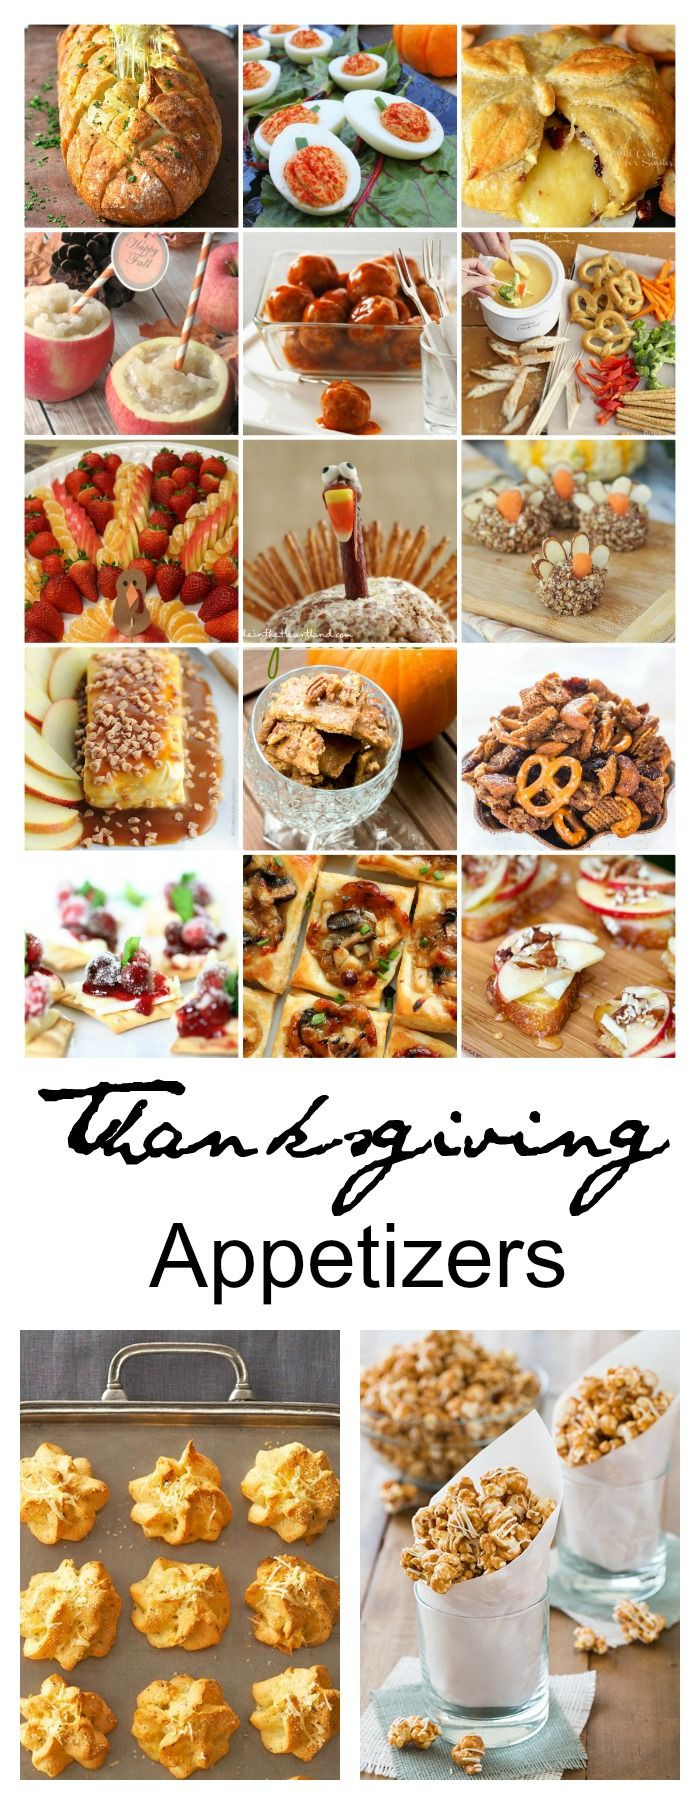 Thanksgiving Appetizers Easy
 25 best ideas about Thanksgiving appetizers on Pinterest